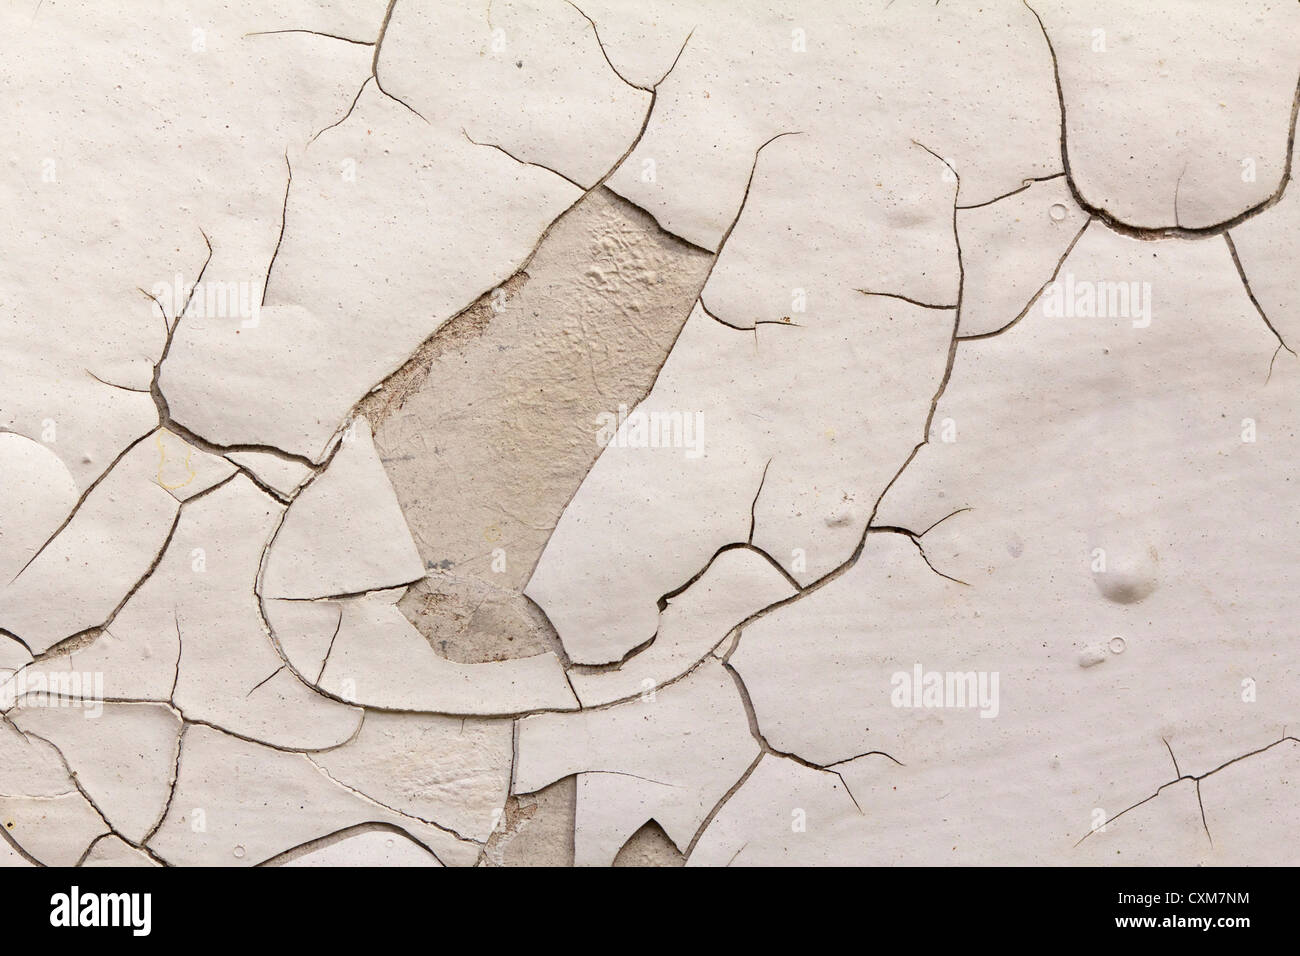 Peeling, chipped paint on wall. Stock Photo